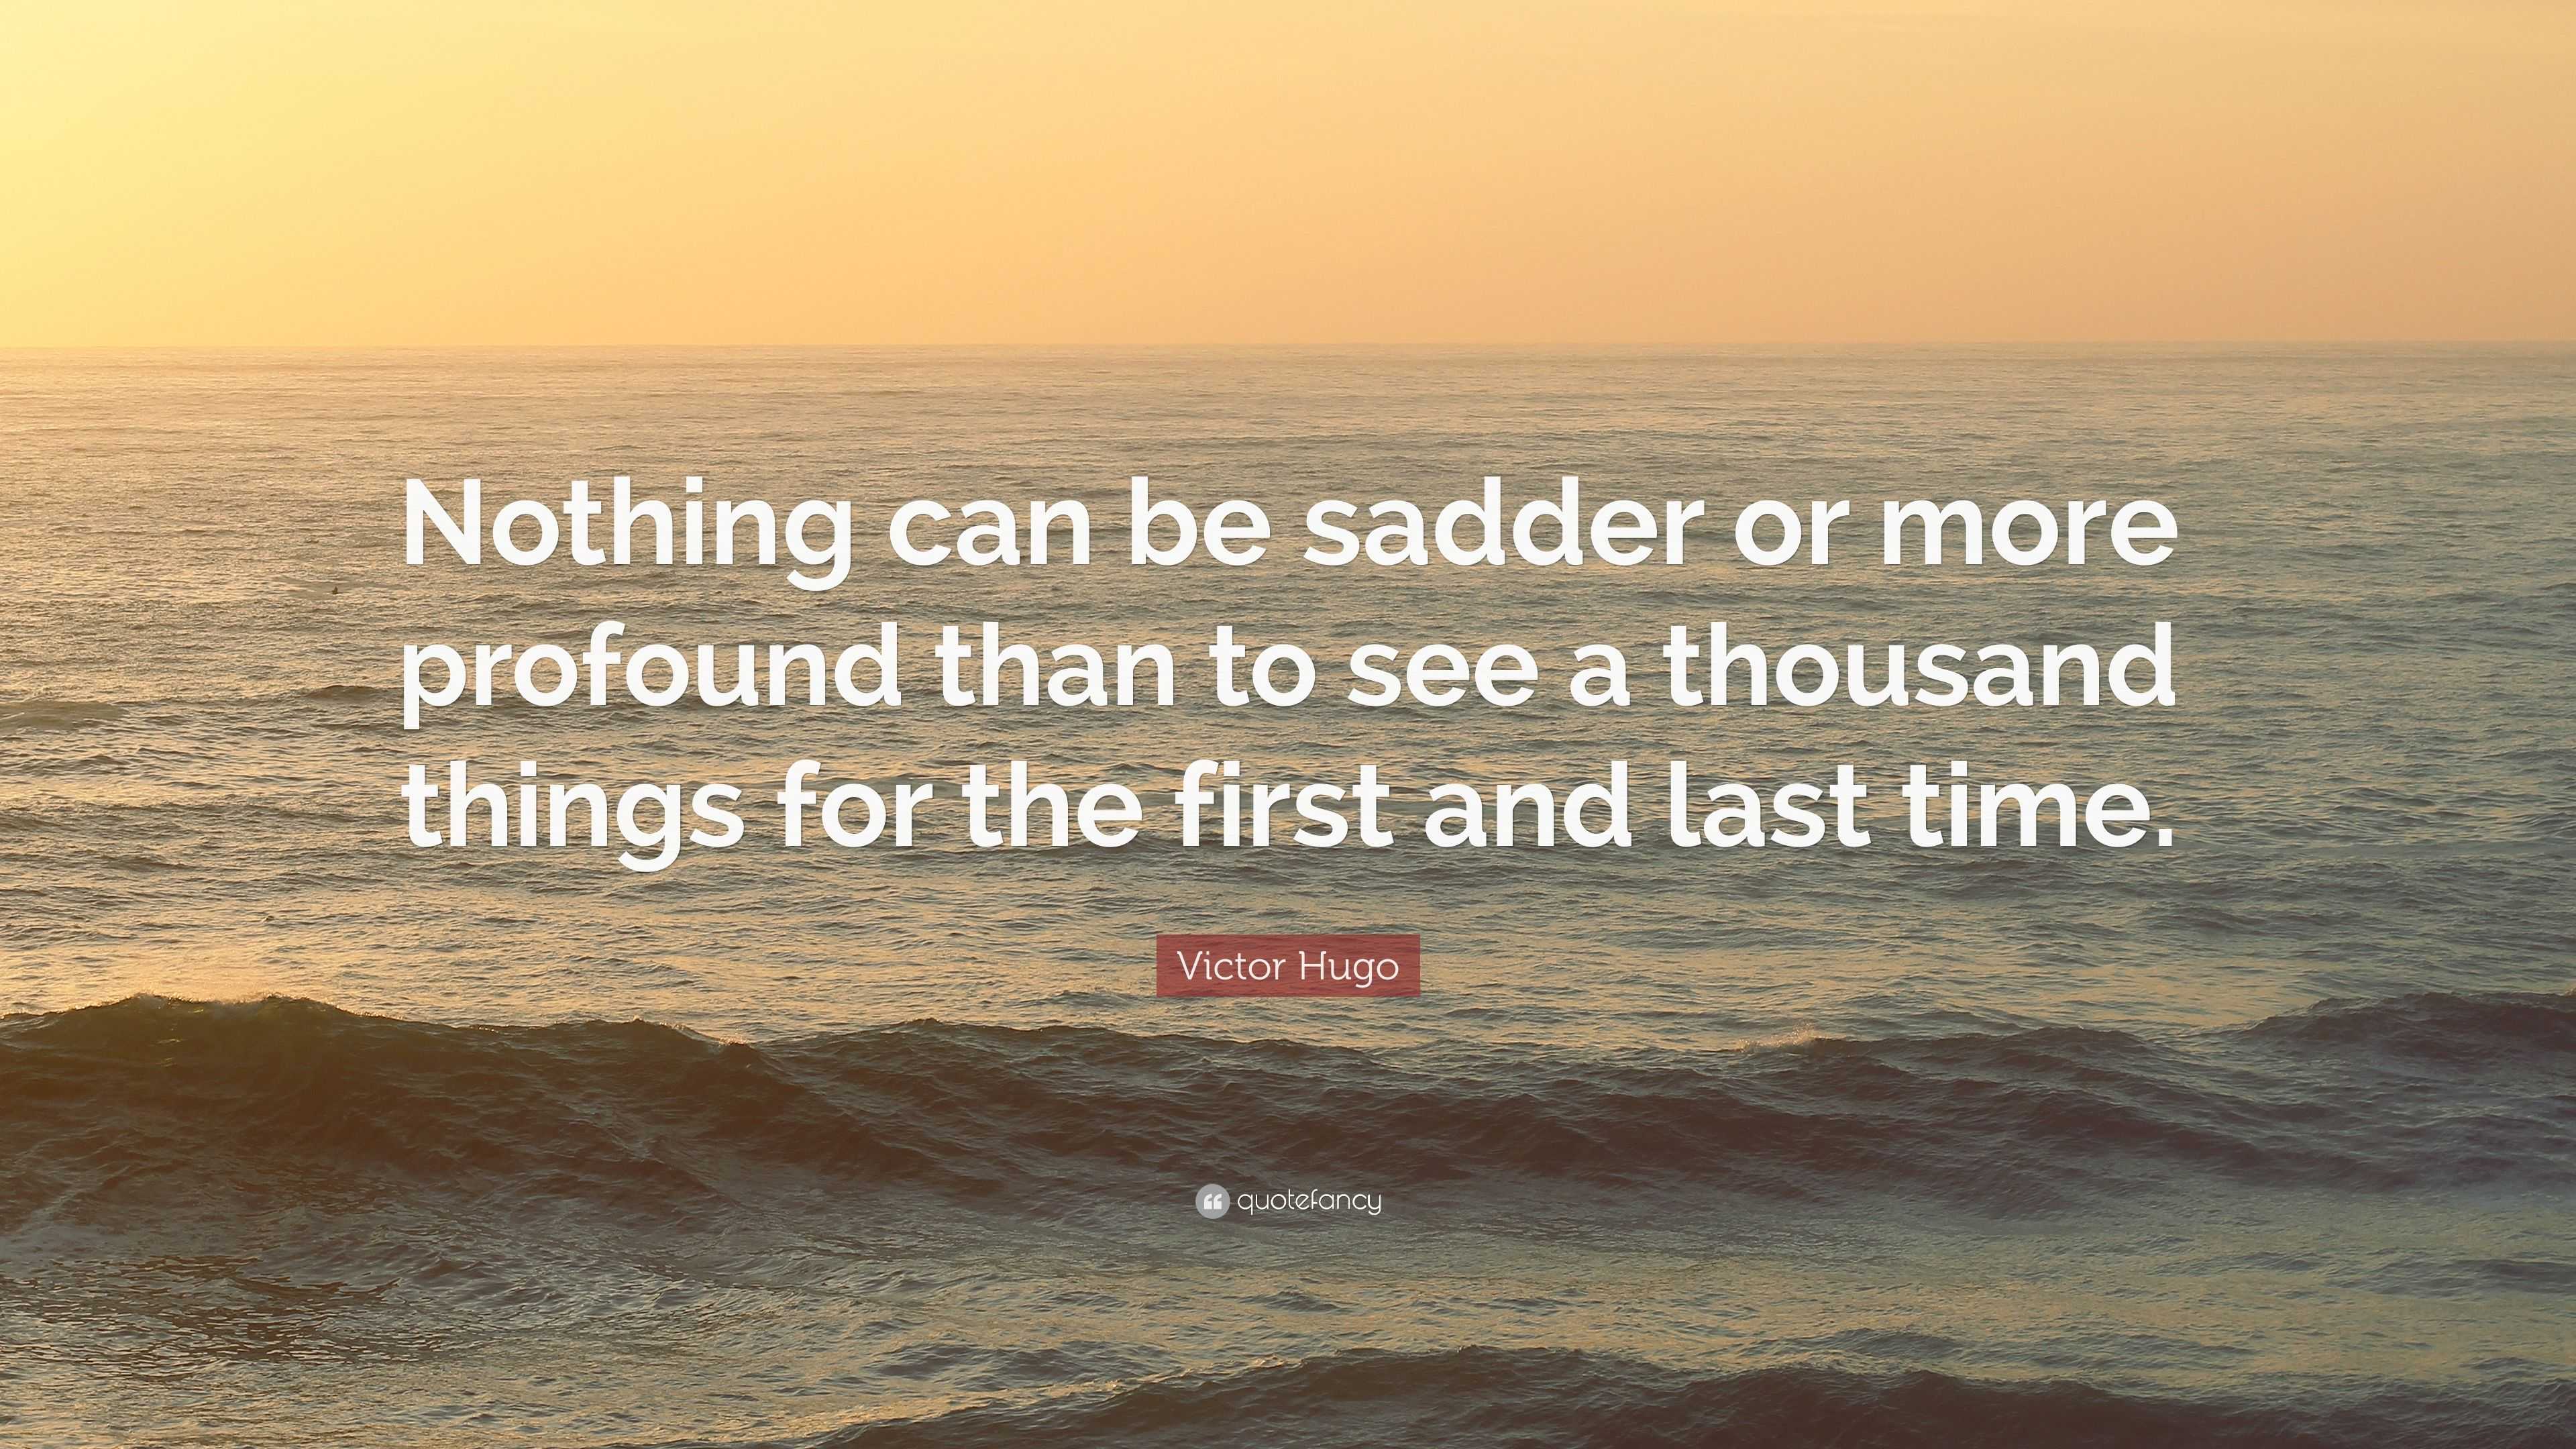 Victor Hugo Quote: “Nothing can be sadder or more profound than to see ...